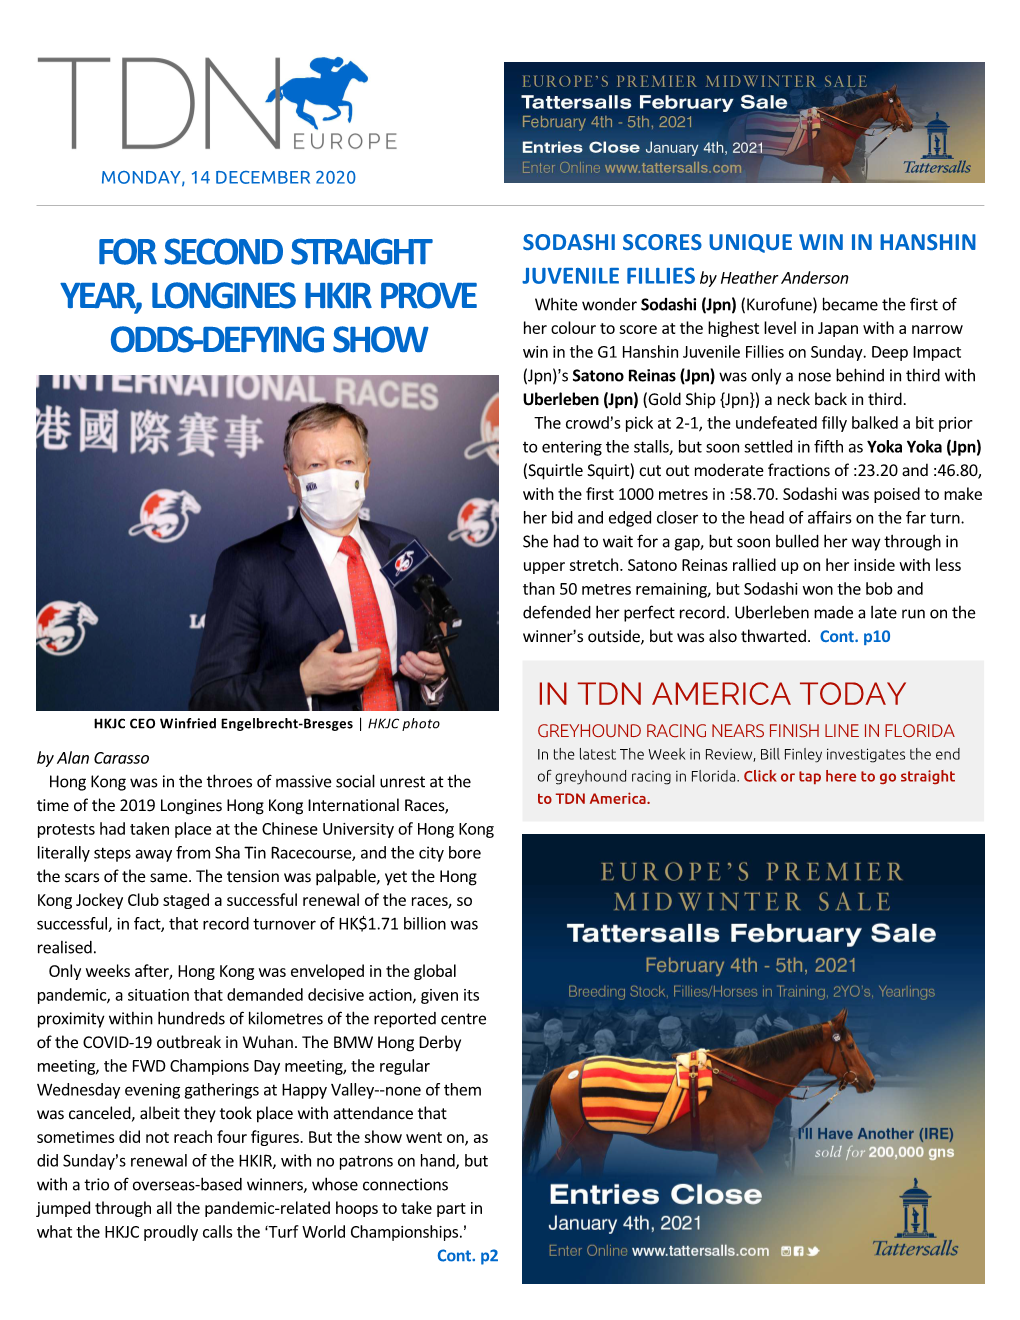 Tdn Europe • Page 2 of 11 • Thetdn.Com Monday • 14 December 2020